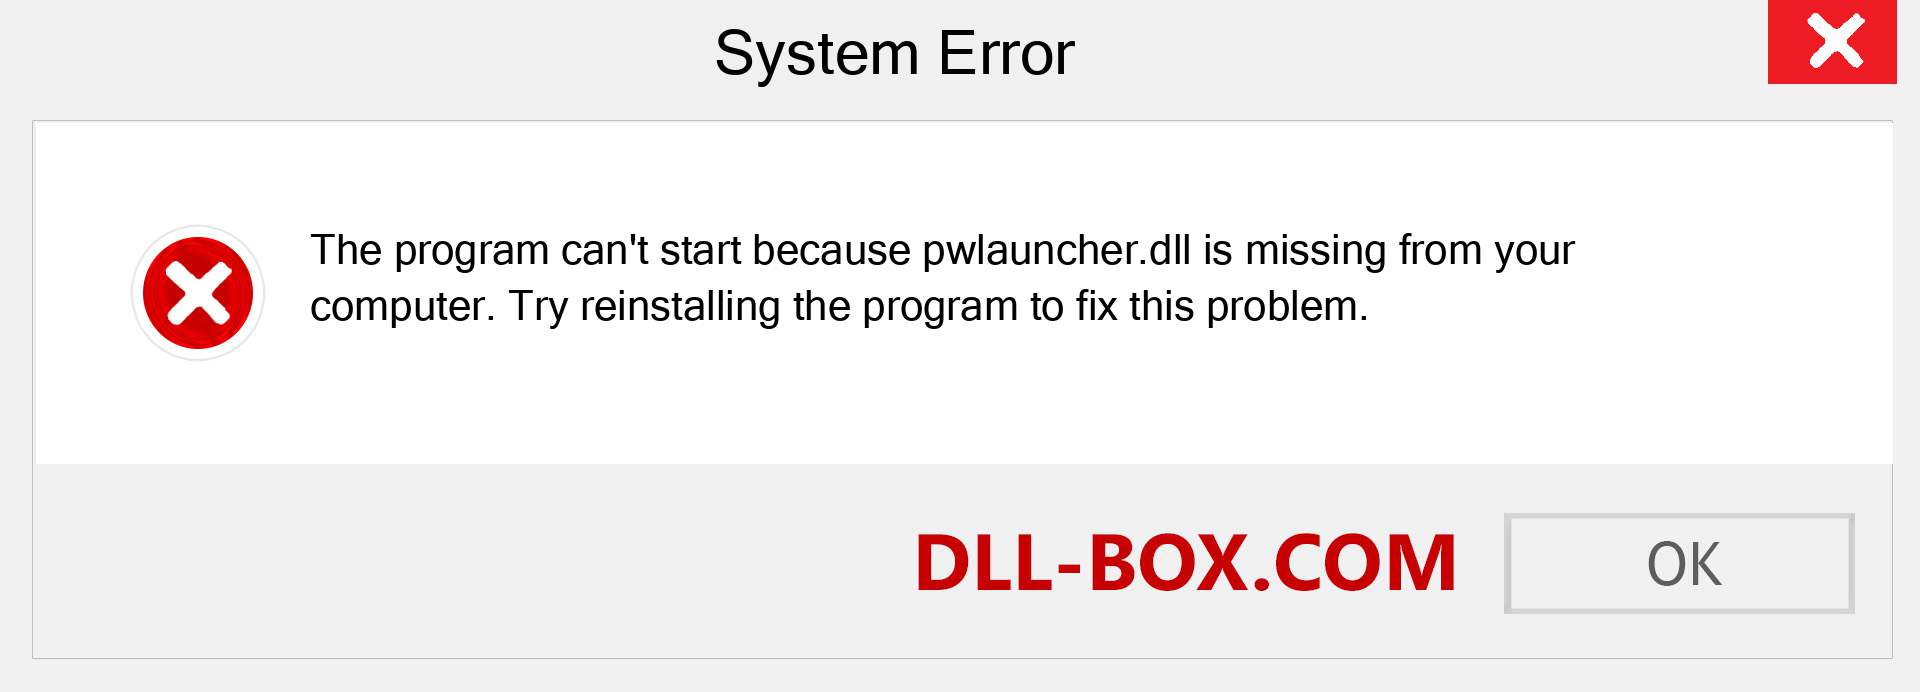  pwlauncher.dll file is missing?. Download for Windows 7, 8, 10 - Fix  pwlauncher dll Missing Error on Windows, photos, images